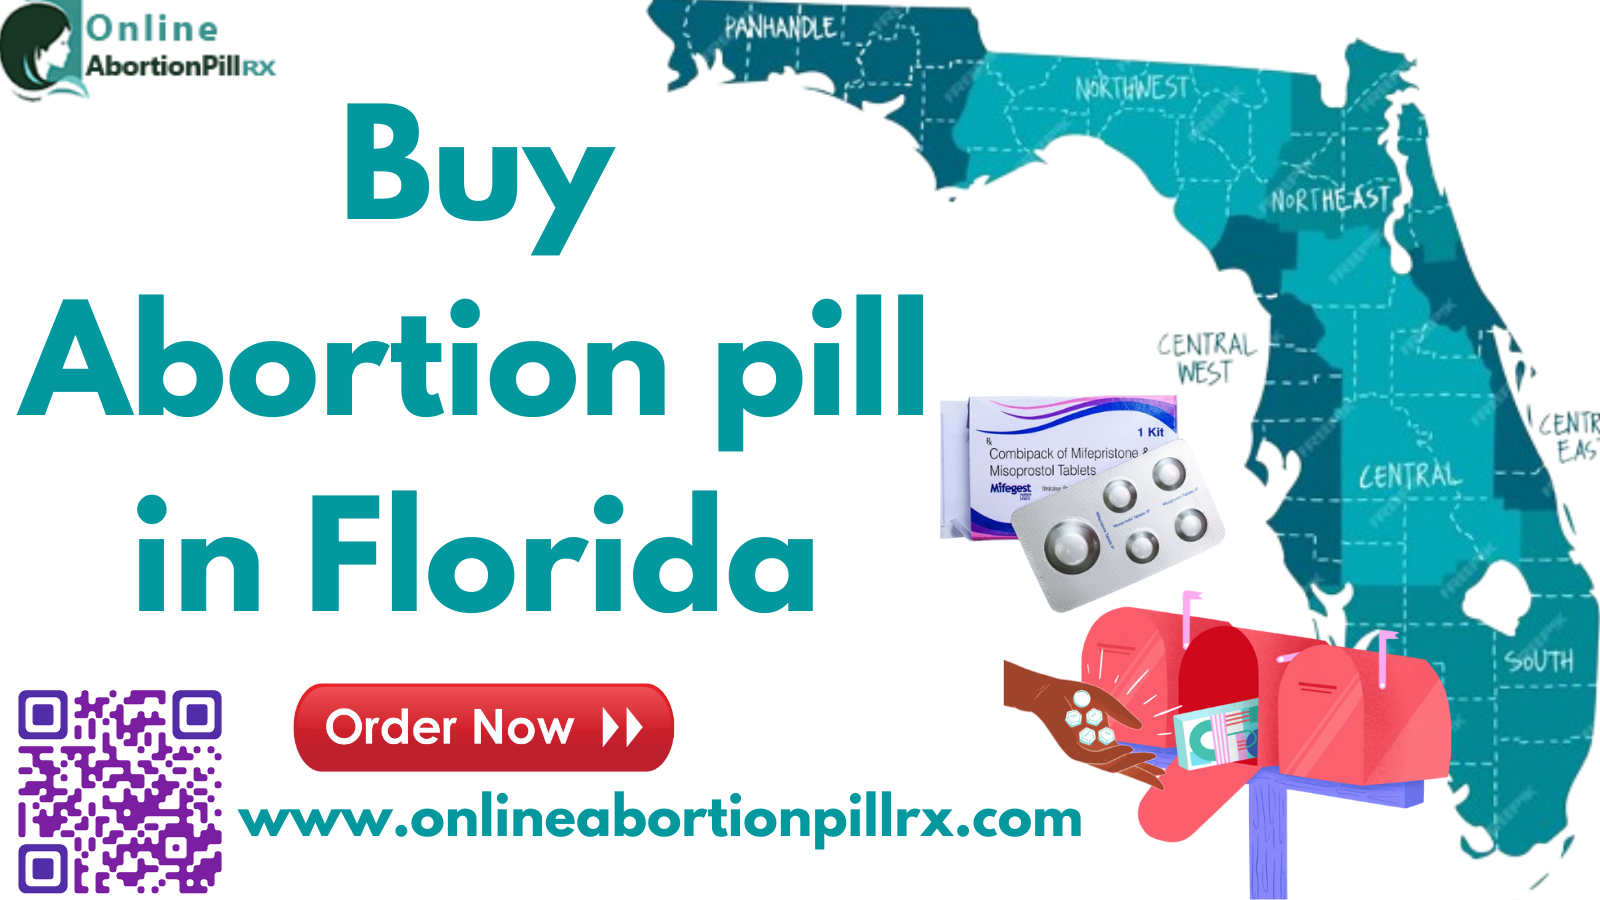  Buy Abortion pill in Florida Order now  - Texas - Dallas ID1538913